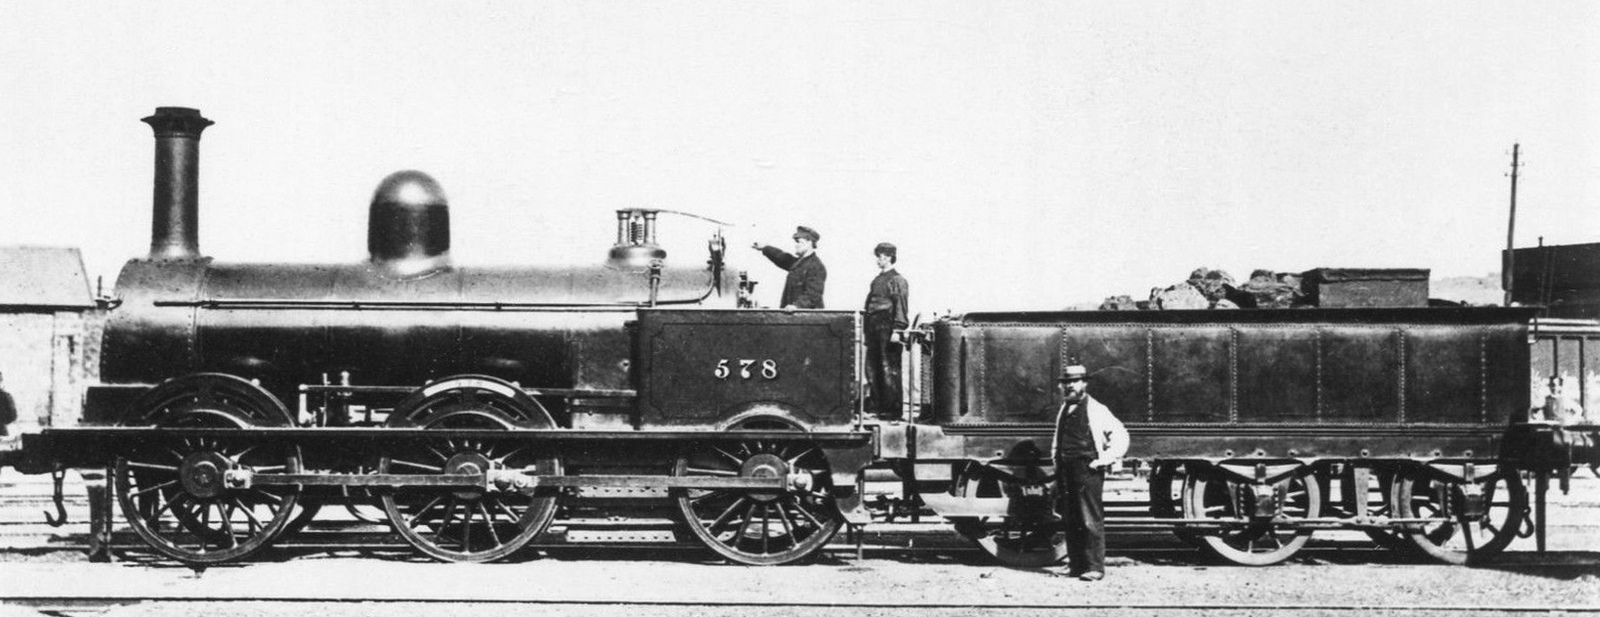 No. 578 in the original version without a closed cab